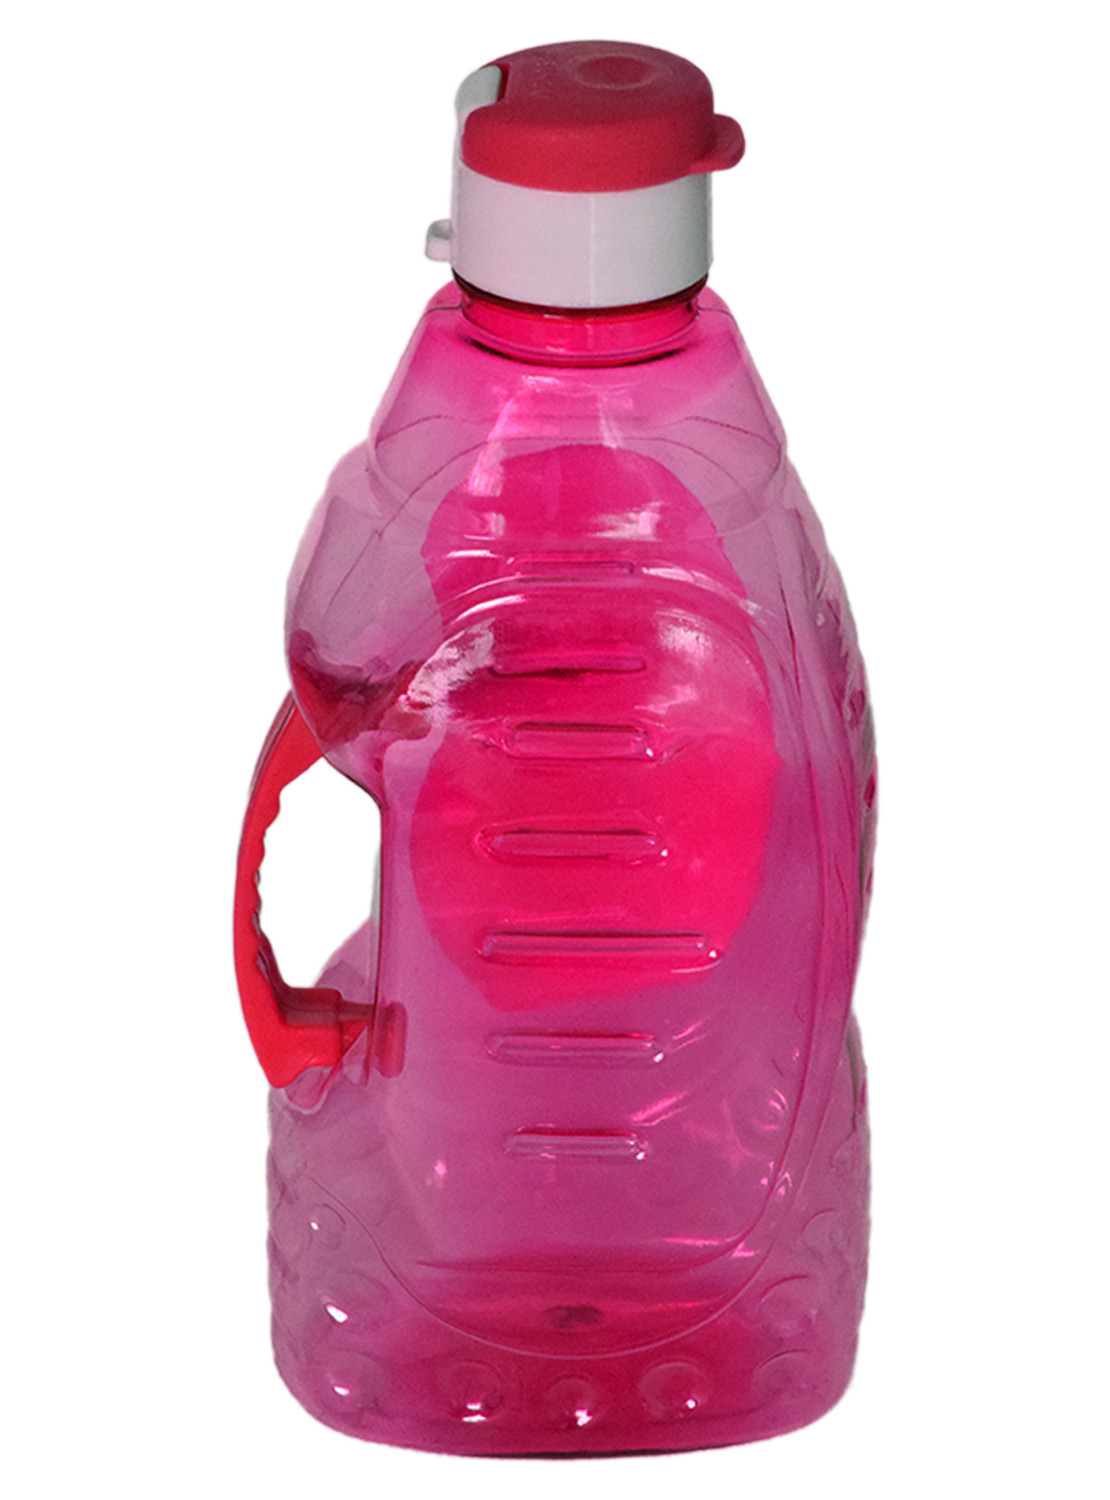 Kuber Industries Tranasparent Platic Water Bottle With Handle, 1500ml- Pack of 2 (Pink & Black)